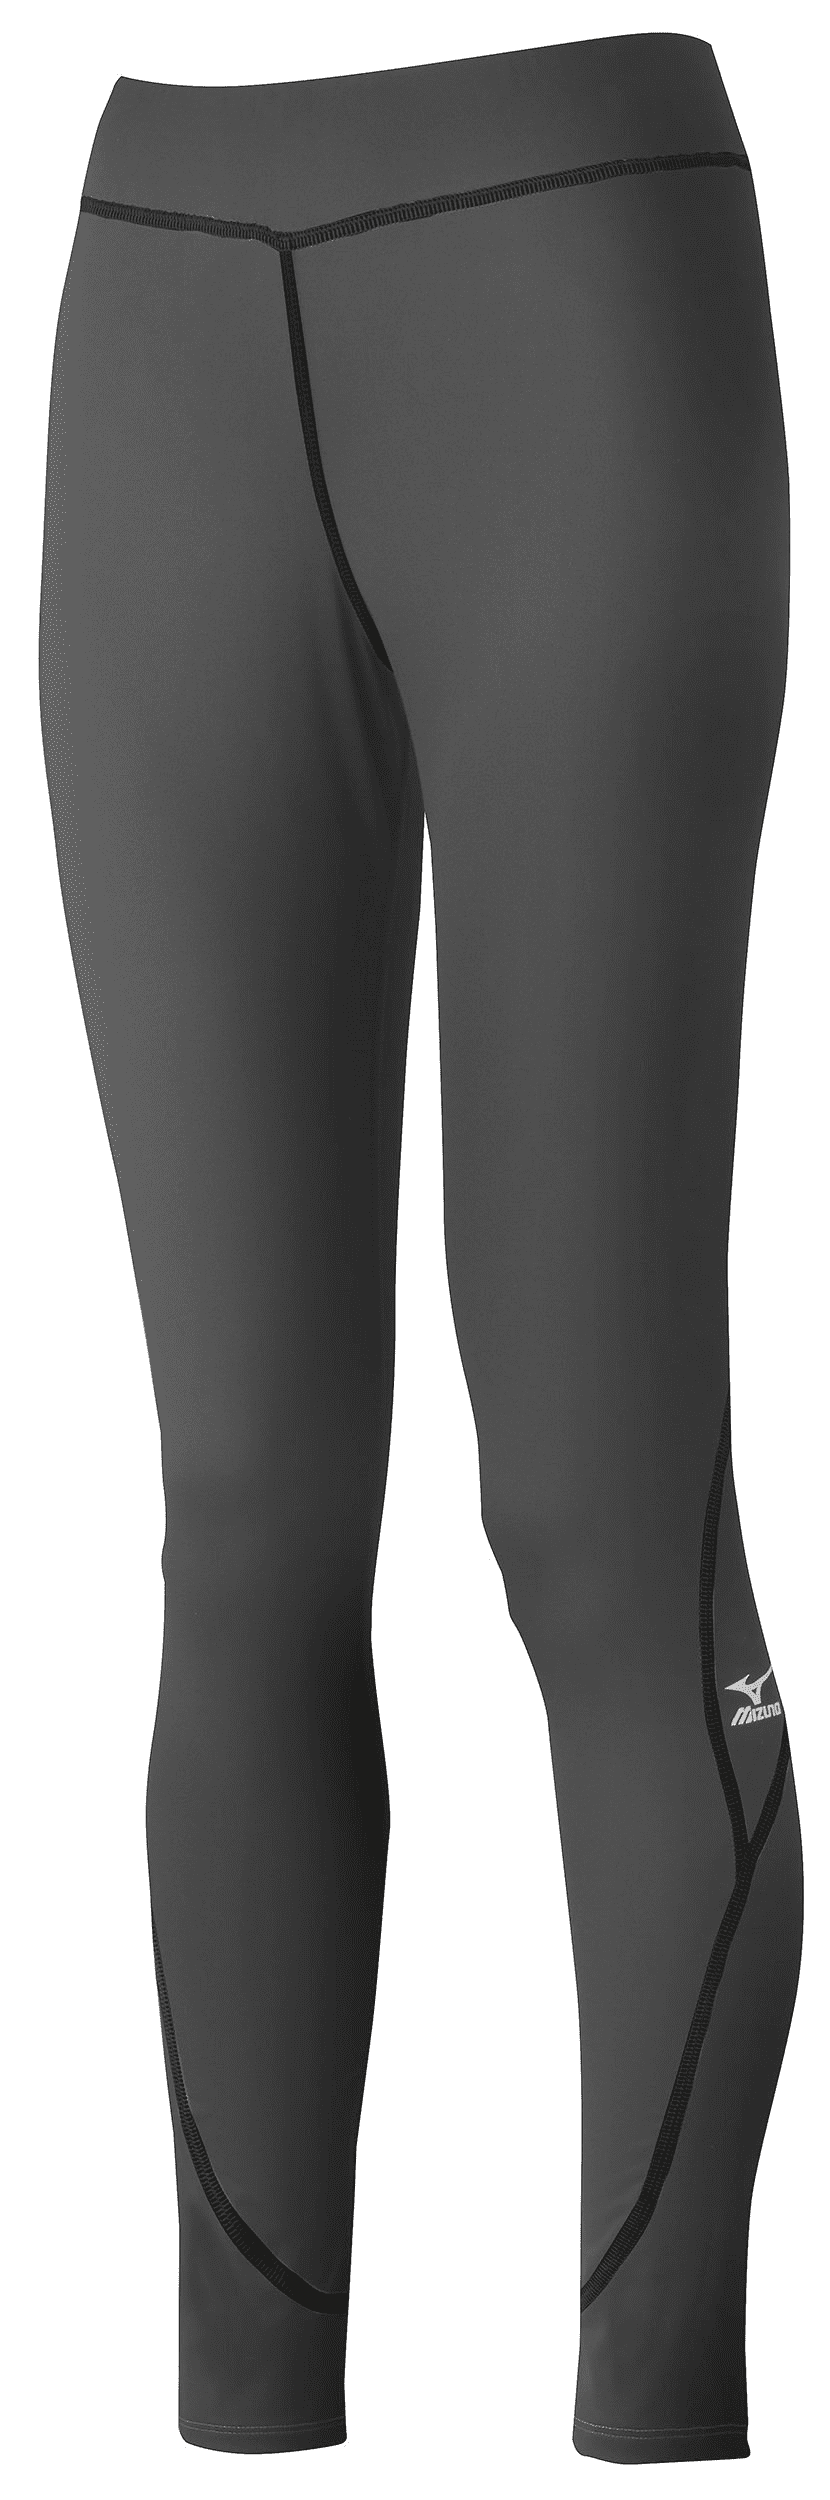 Mizuno Women's Beach Volleyball Omnis Tight, Size Extra Small, Charcoal  (9292)